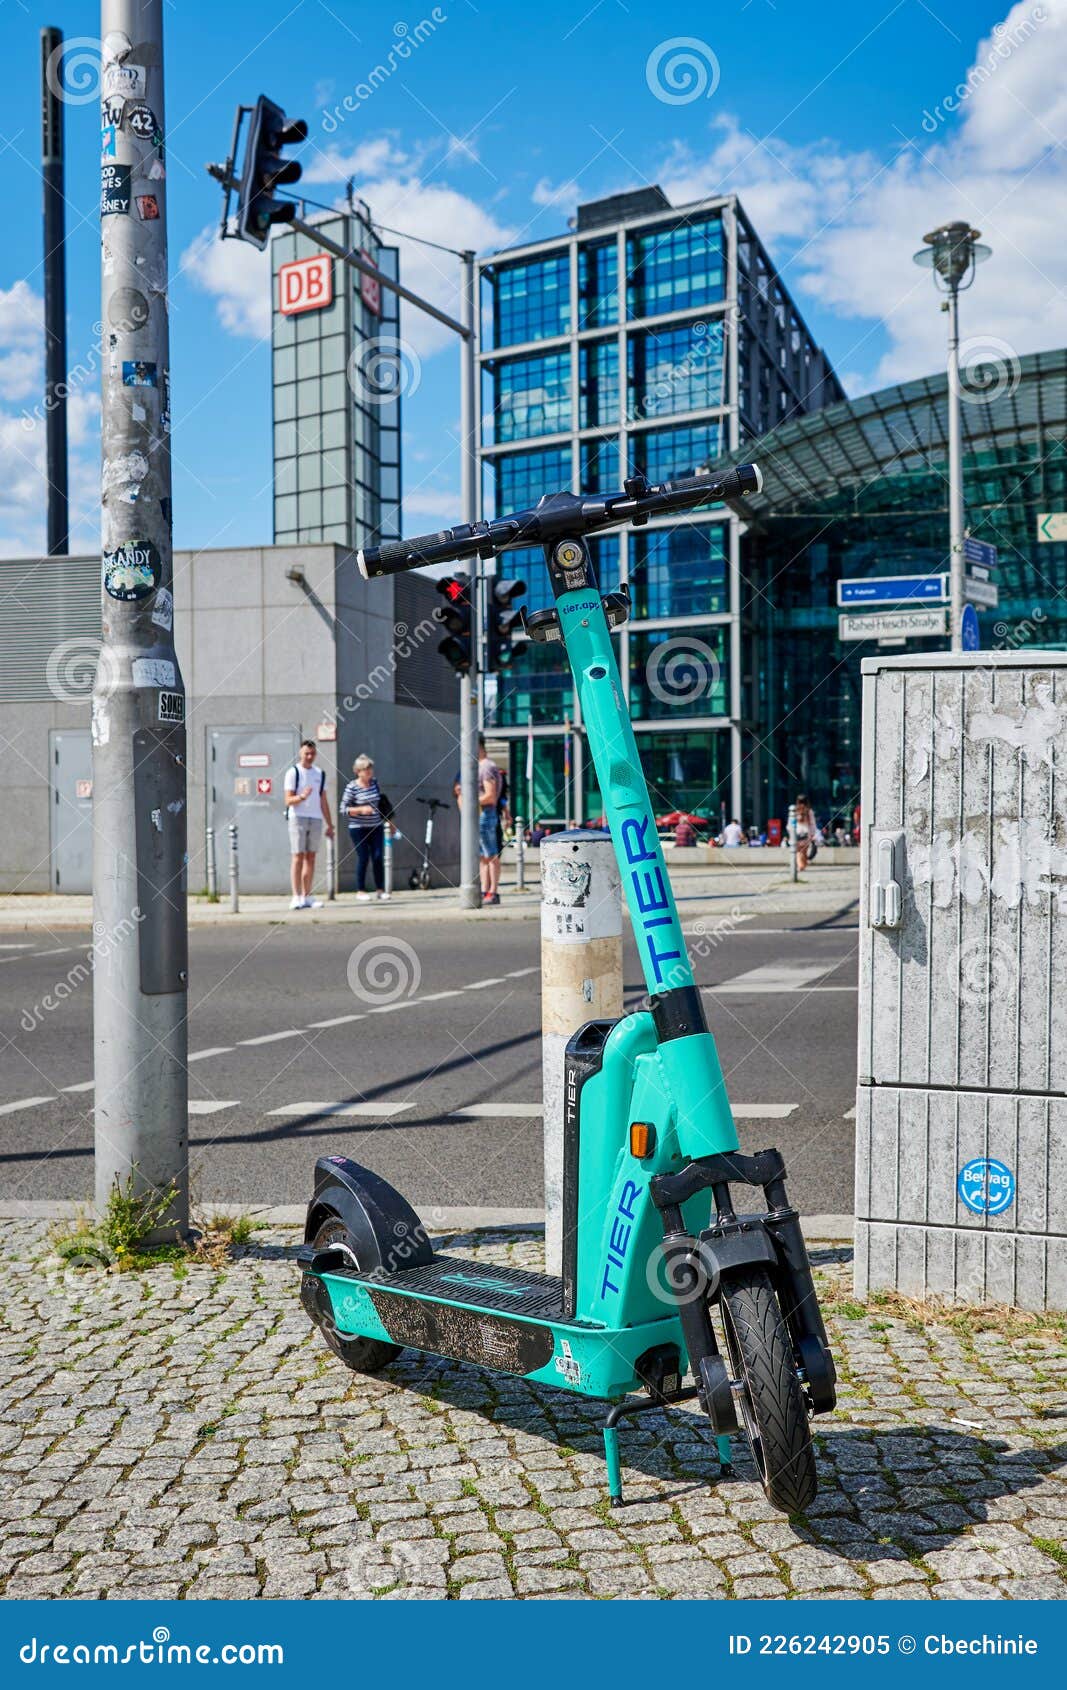 Scooter with Electric Drive for Rent in Editorial Image - Image parked, cityscape: